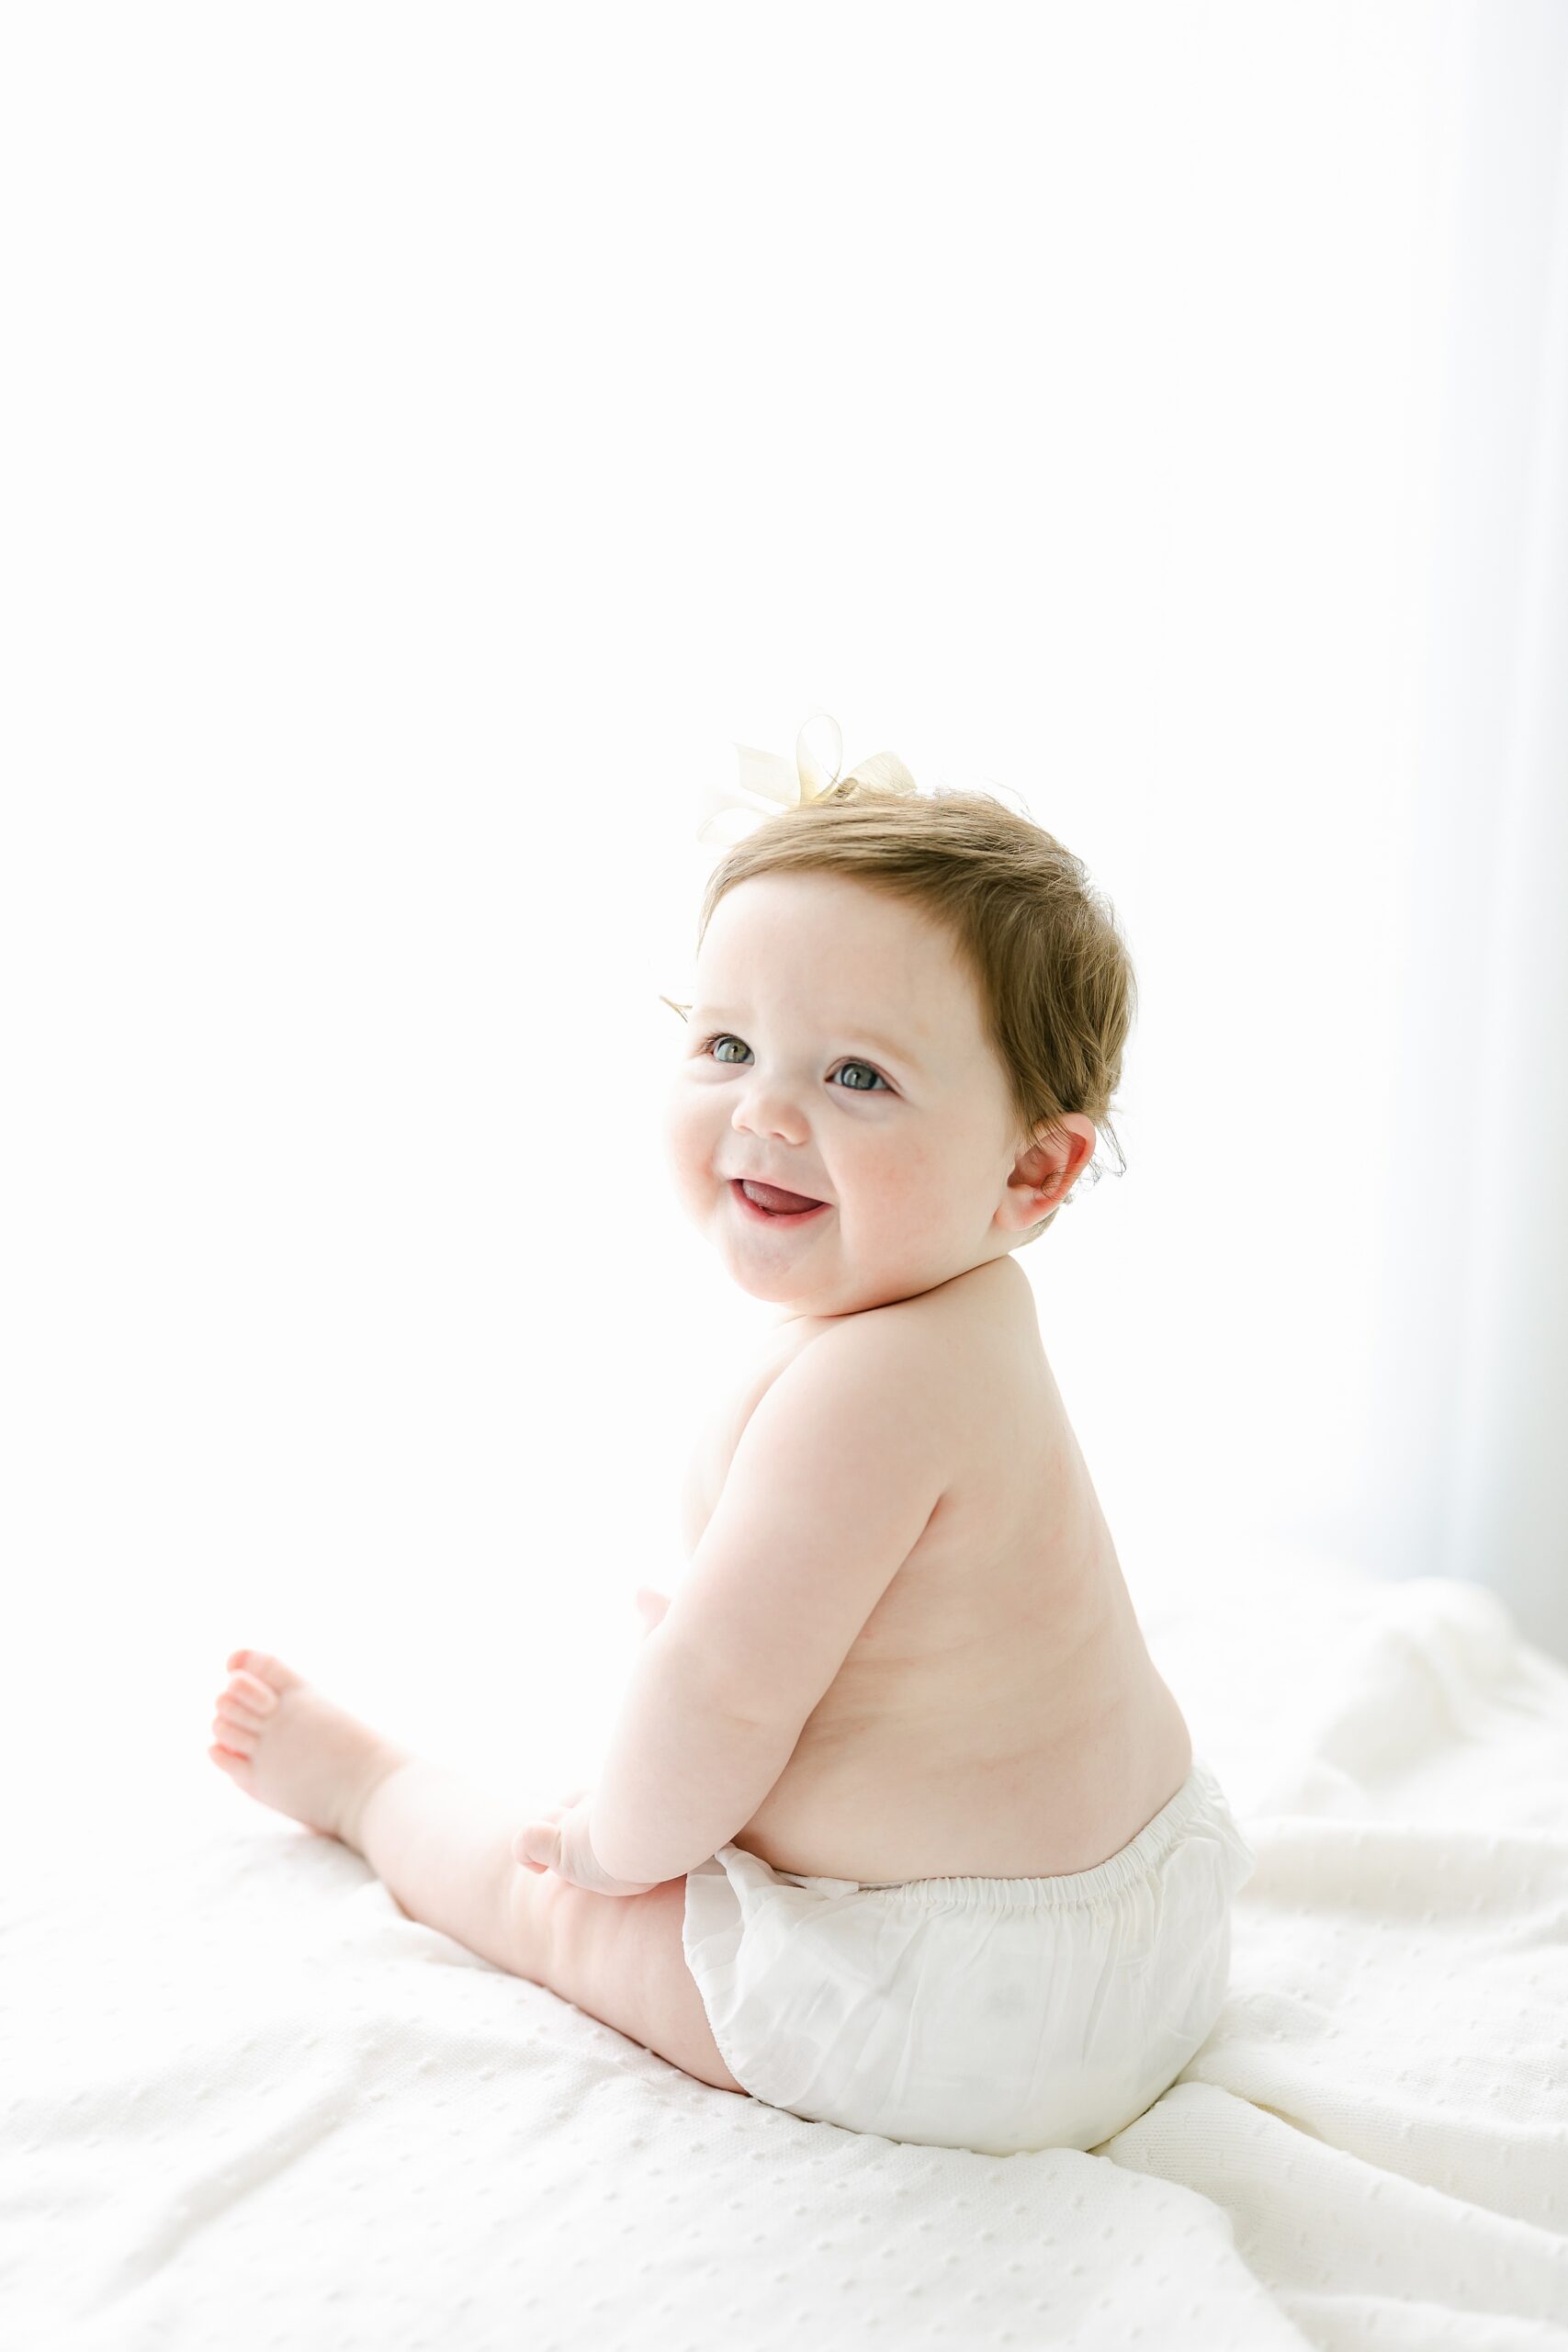 A happy infant sits on a bed under a bright window smiling after visiting a pediatric chiropractors Indianapolis